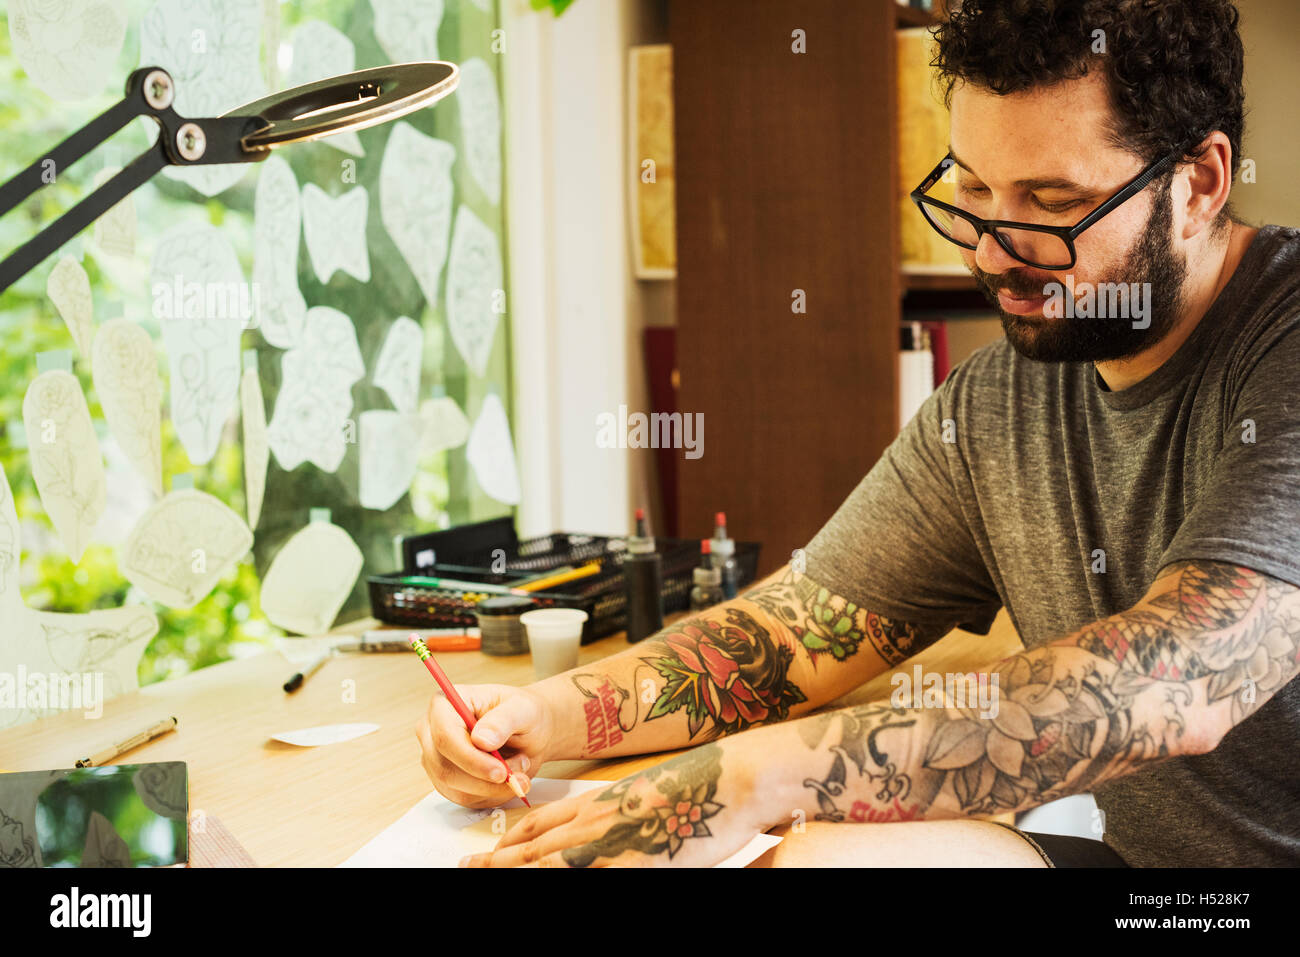 Bearded man with tattoos on his arms, sitting at a desk, drawing. Stock Photo